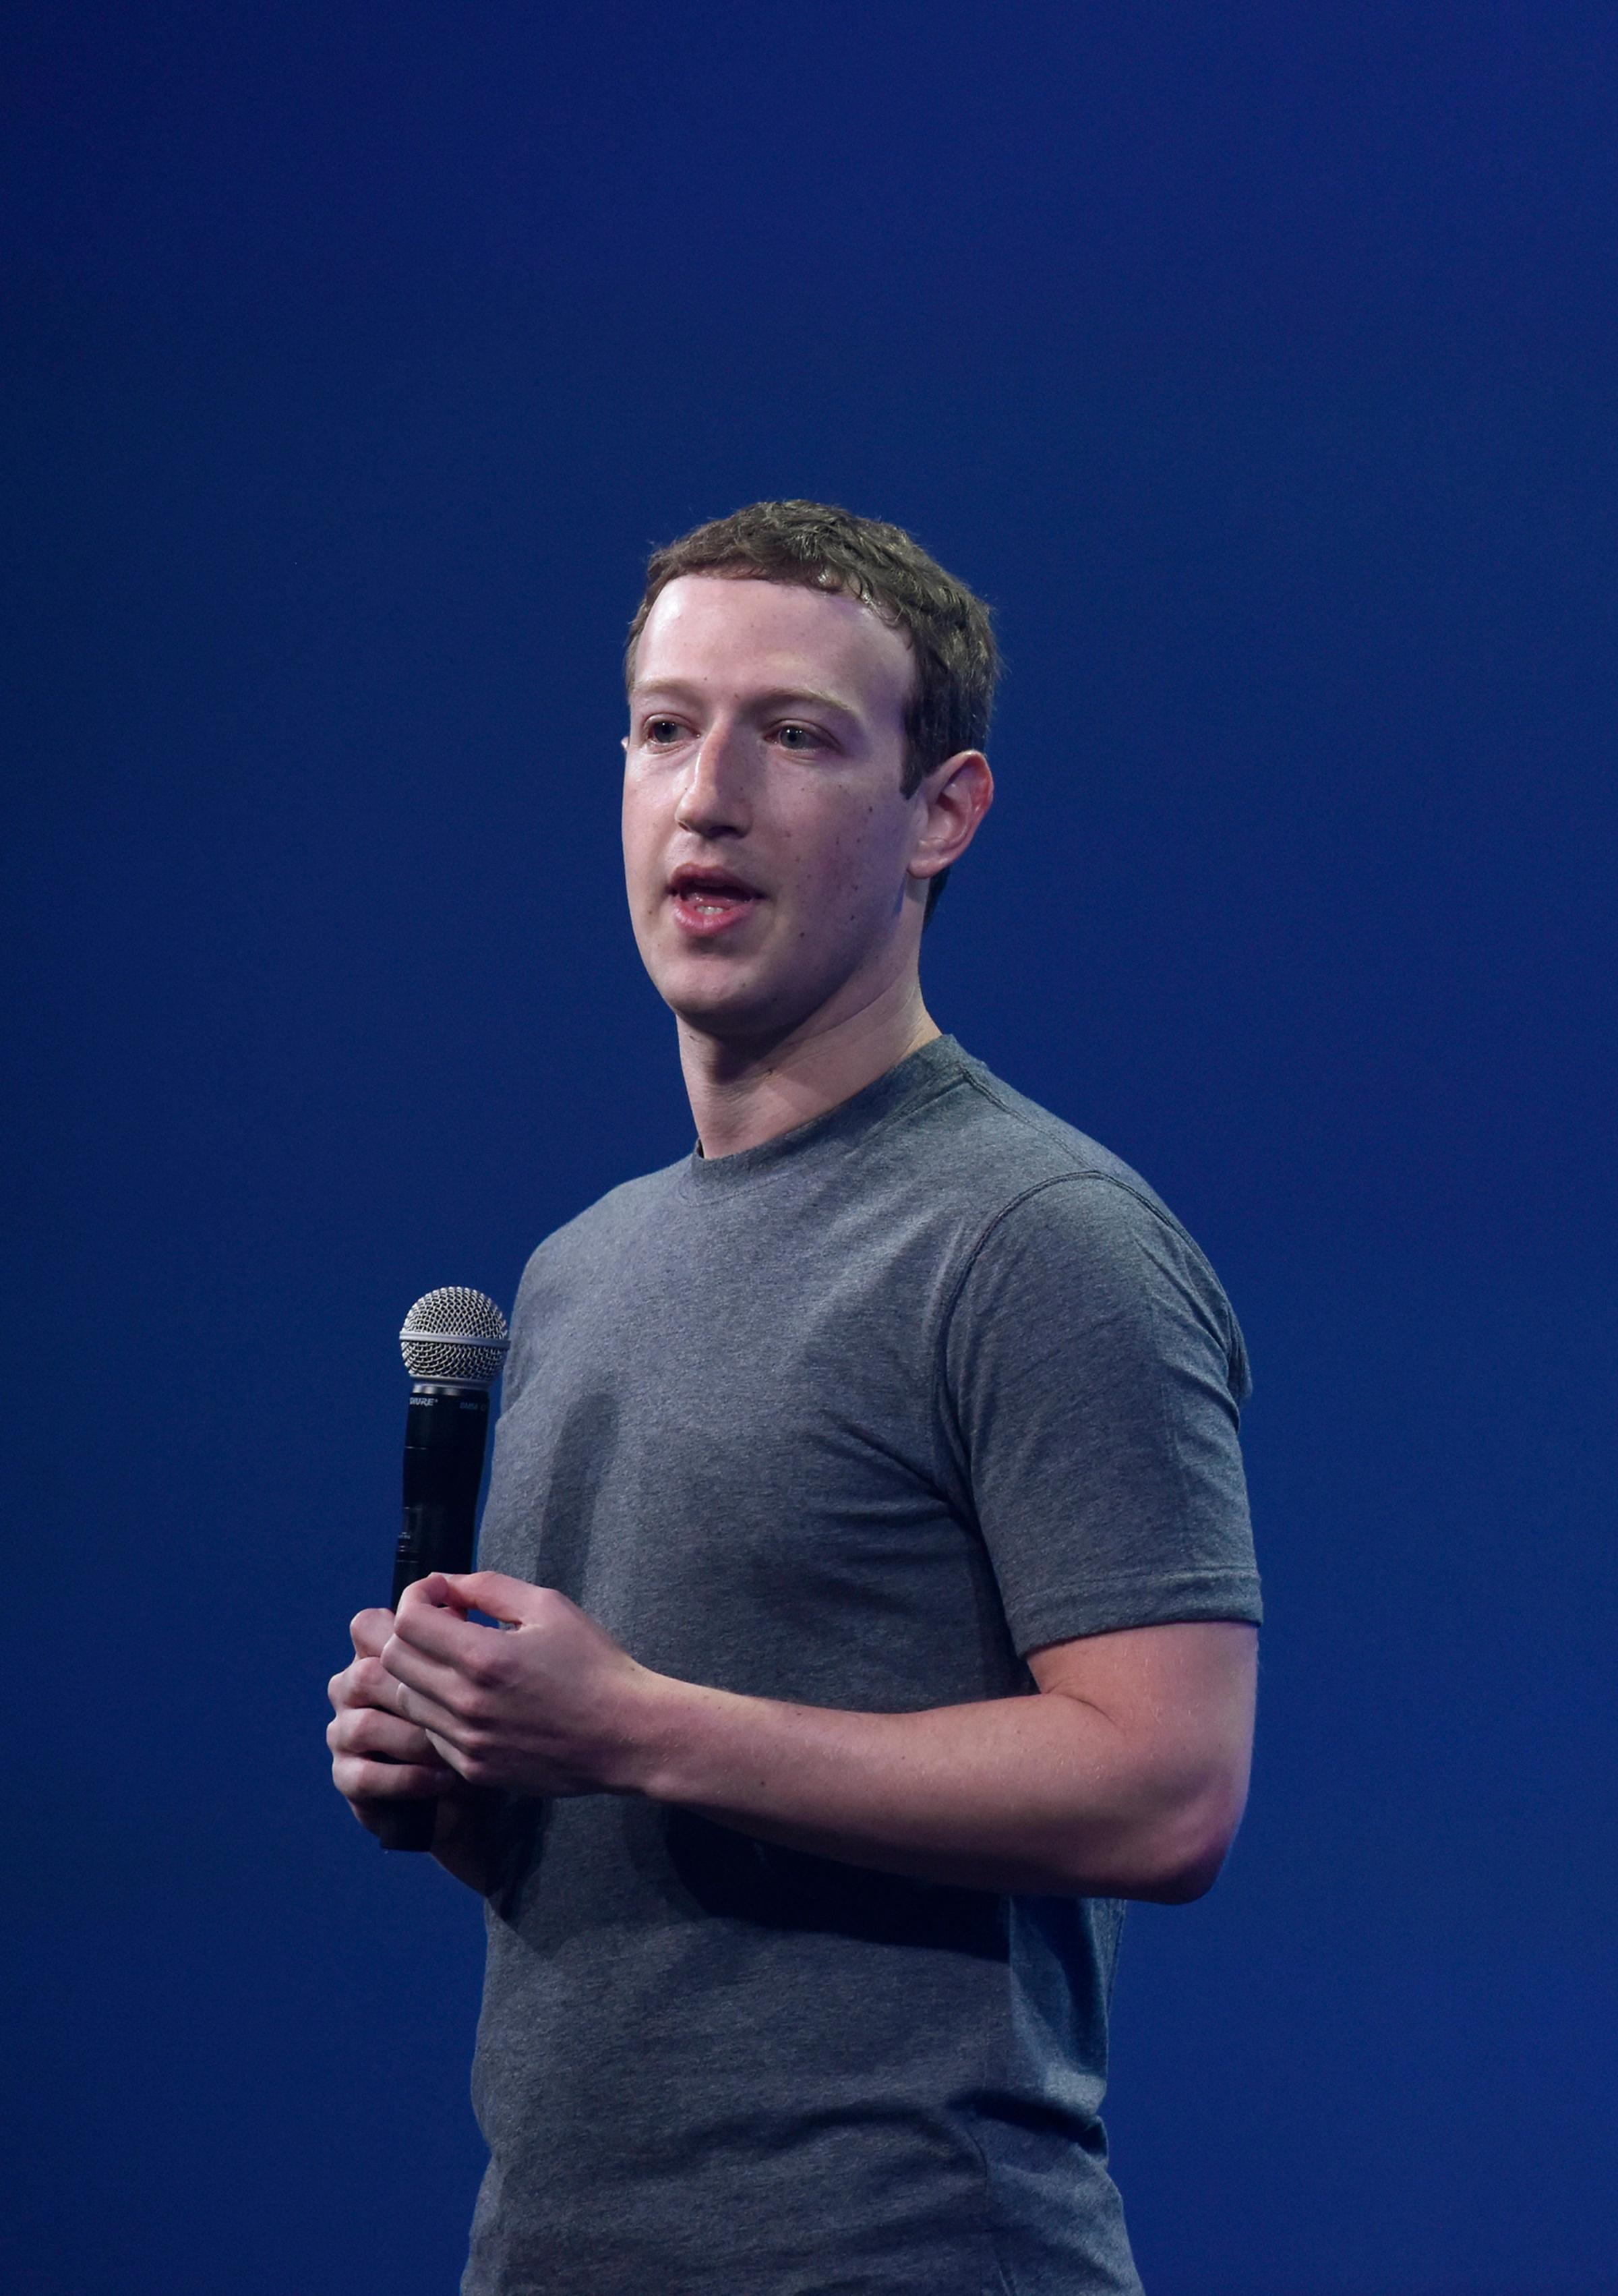 Mark Zuckerberg, chief executive officer of Facebook Inc., at the Facebook F8 Developers Conference in San Francisco on March 25, 2015.